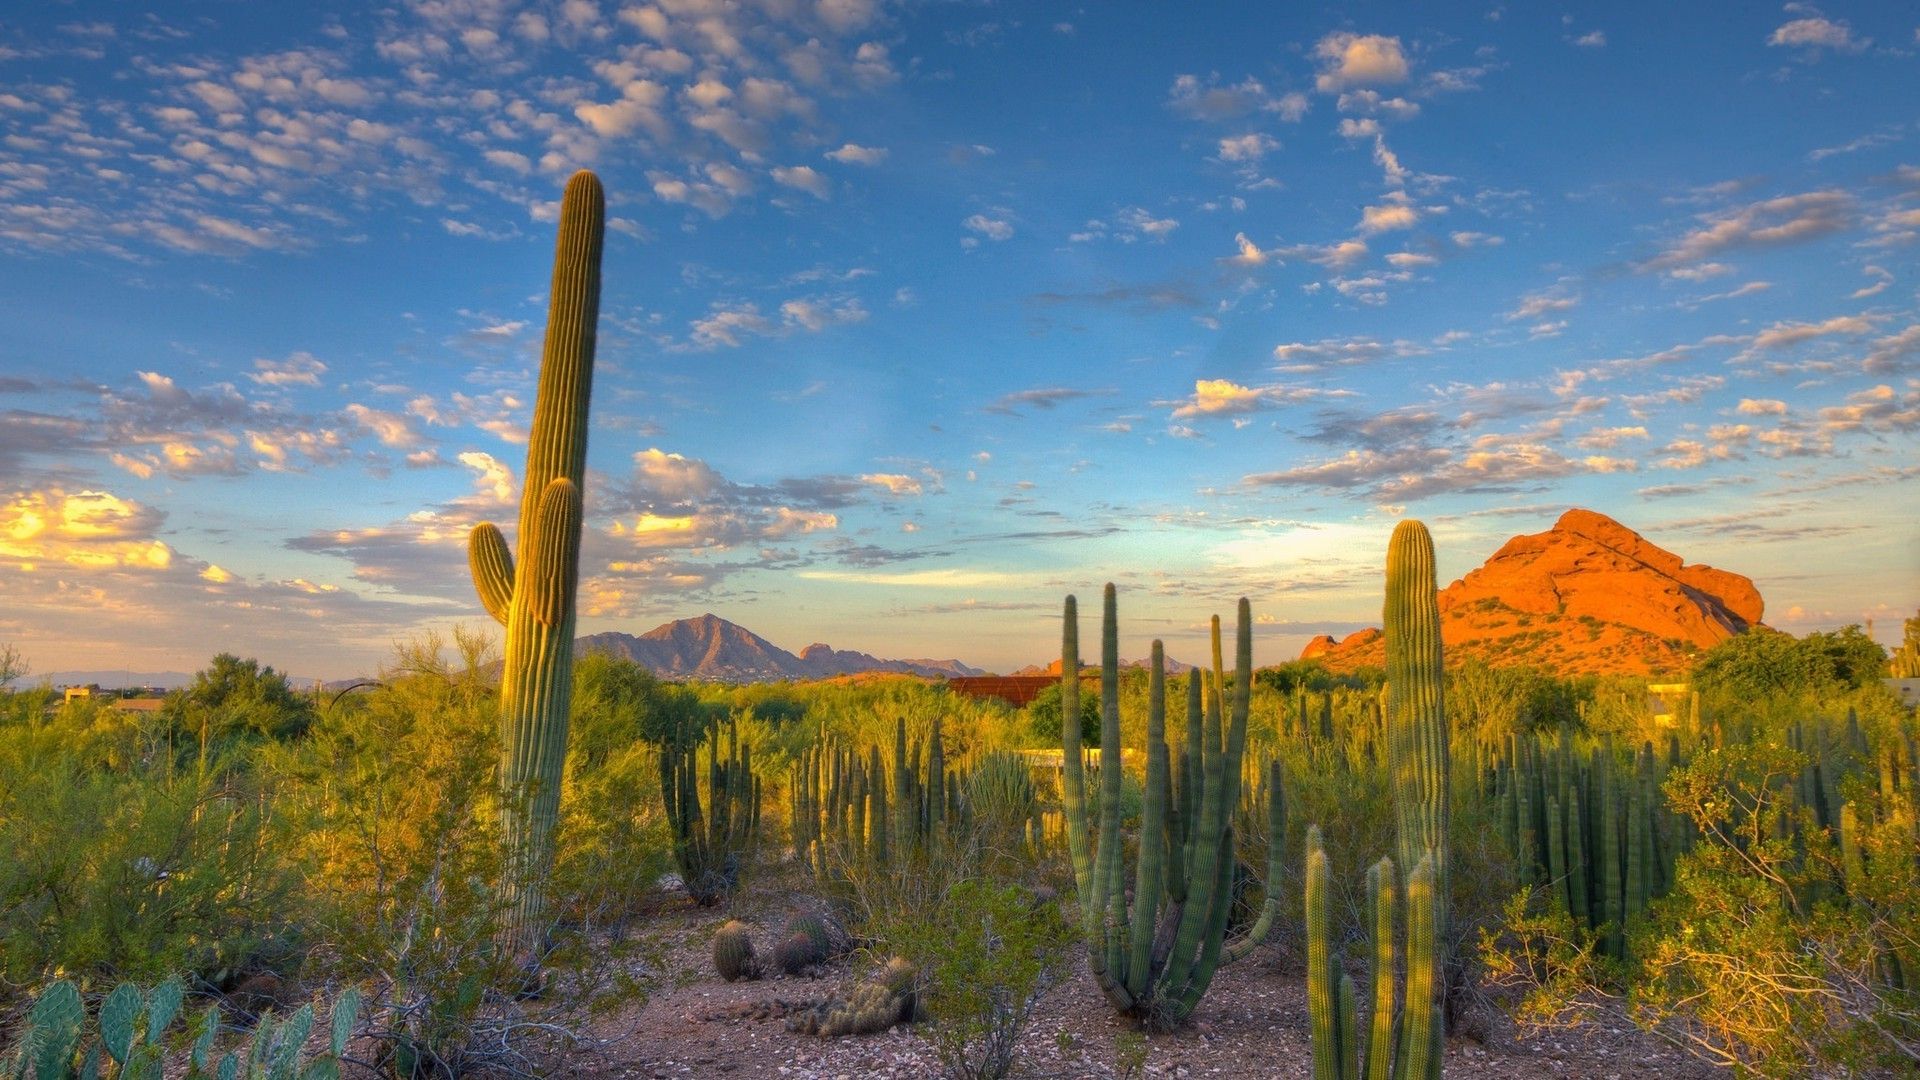 Cactus plants in the desert with a beautiful sky - Desert